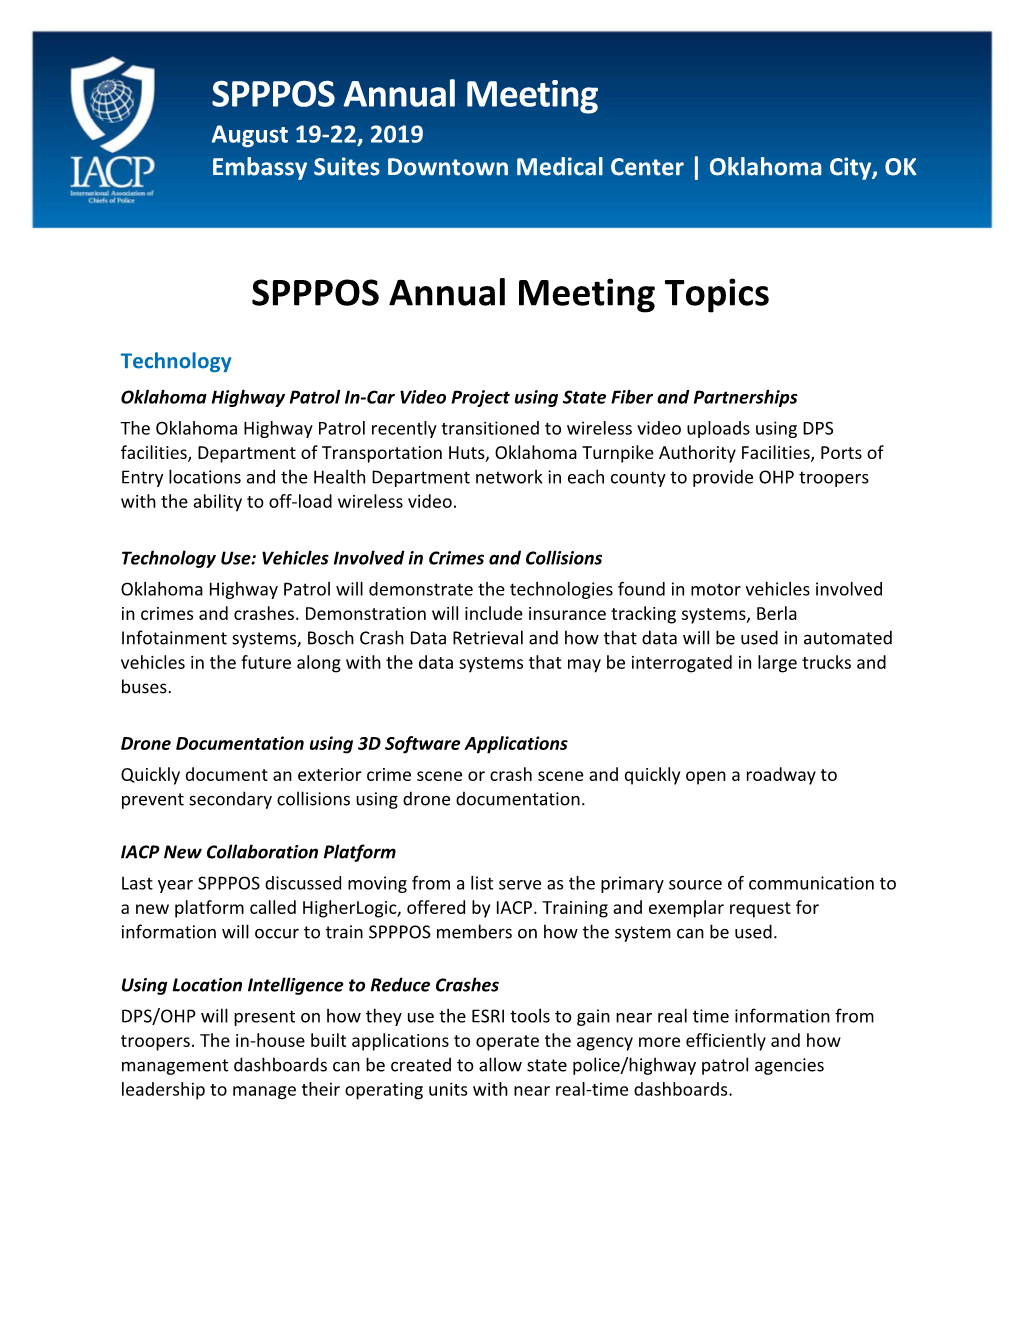 SPPPOS Annual Meeting Topics